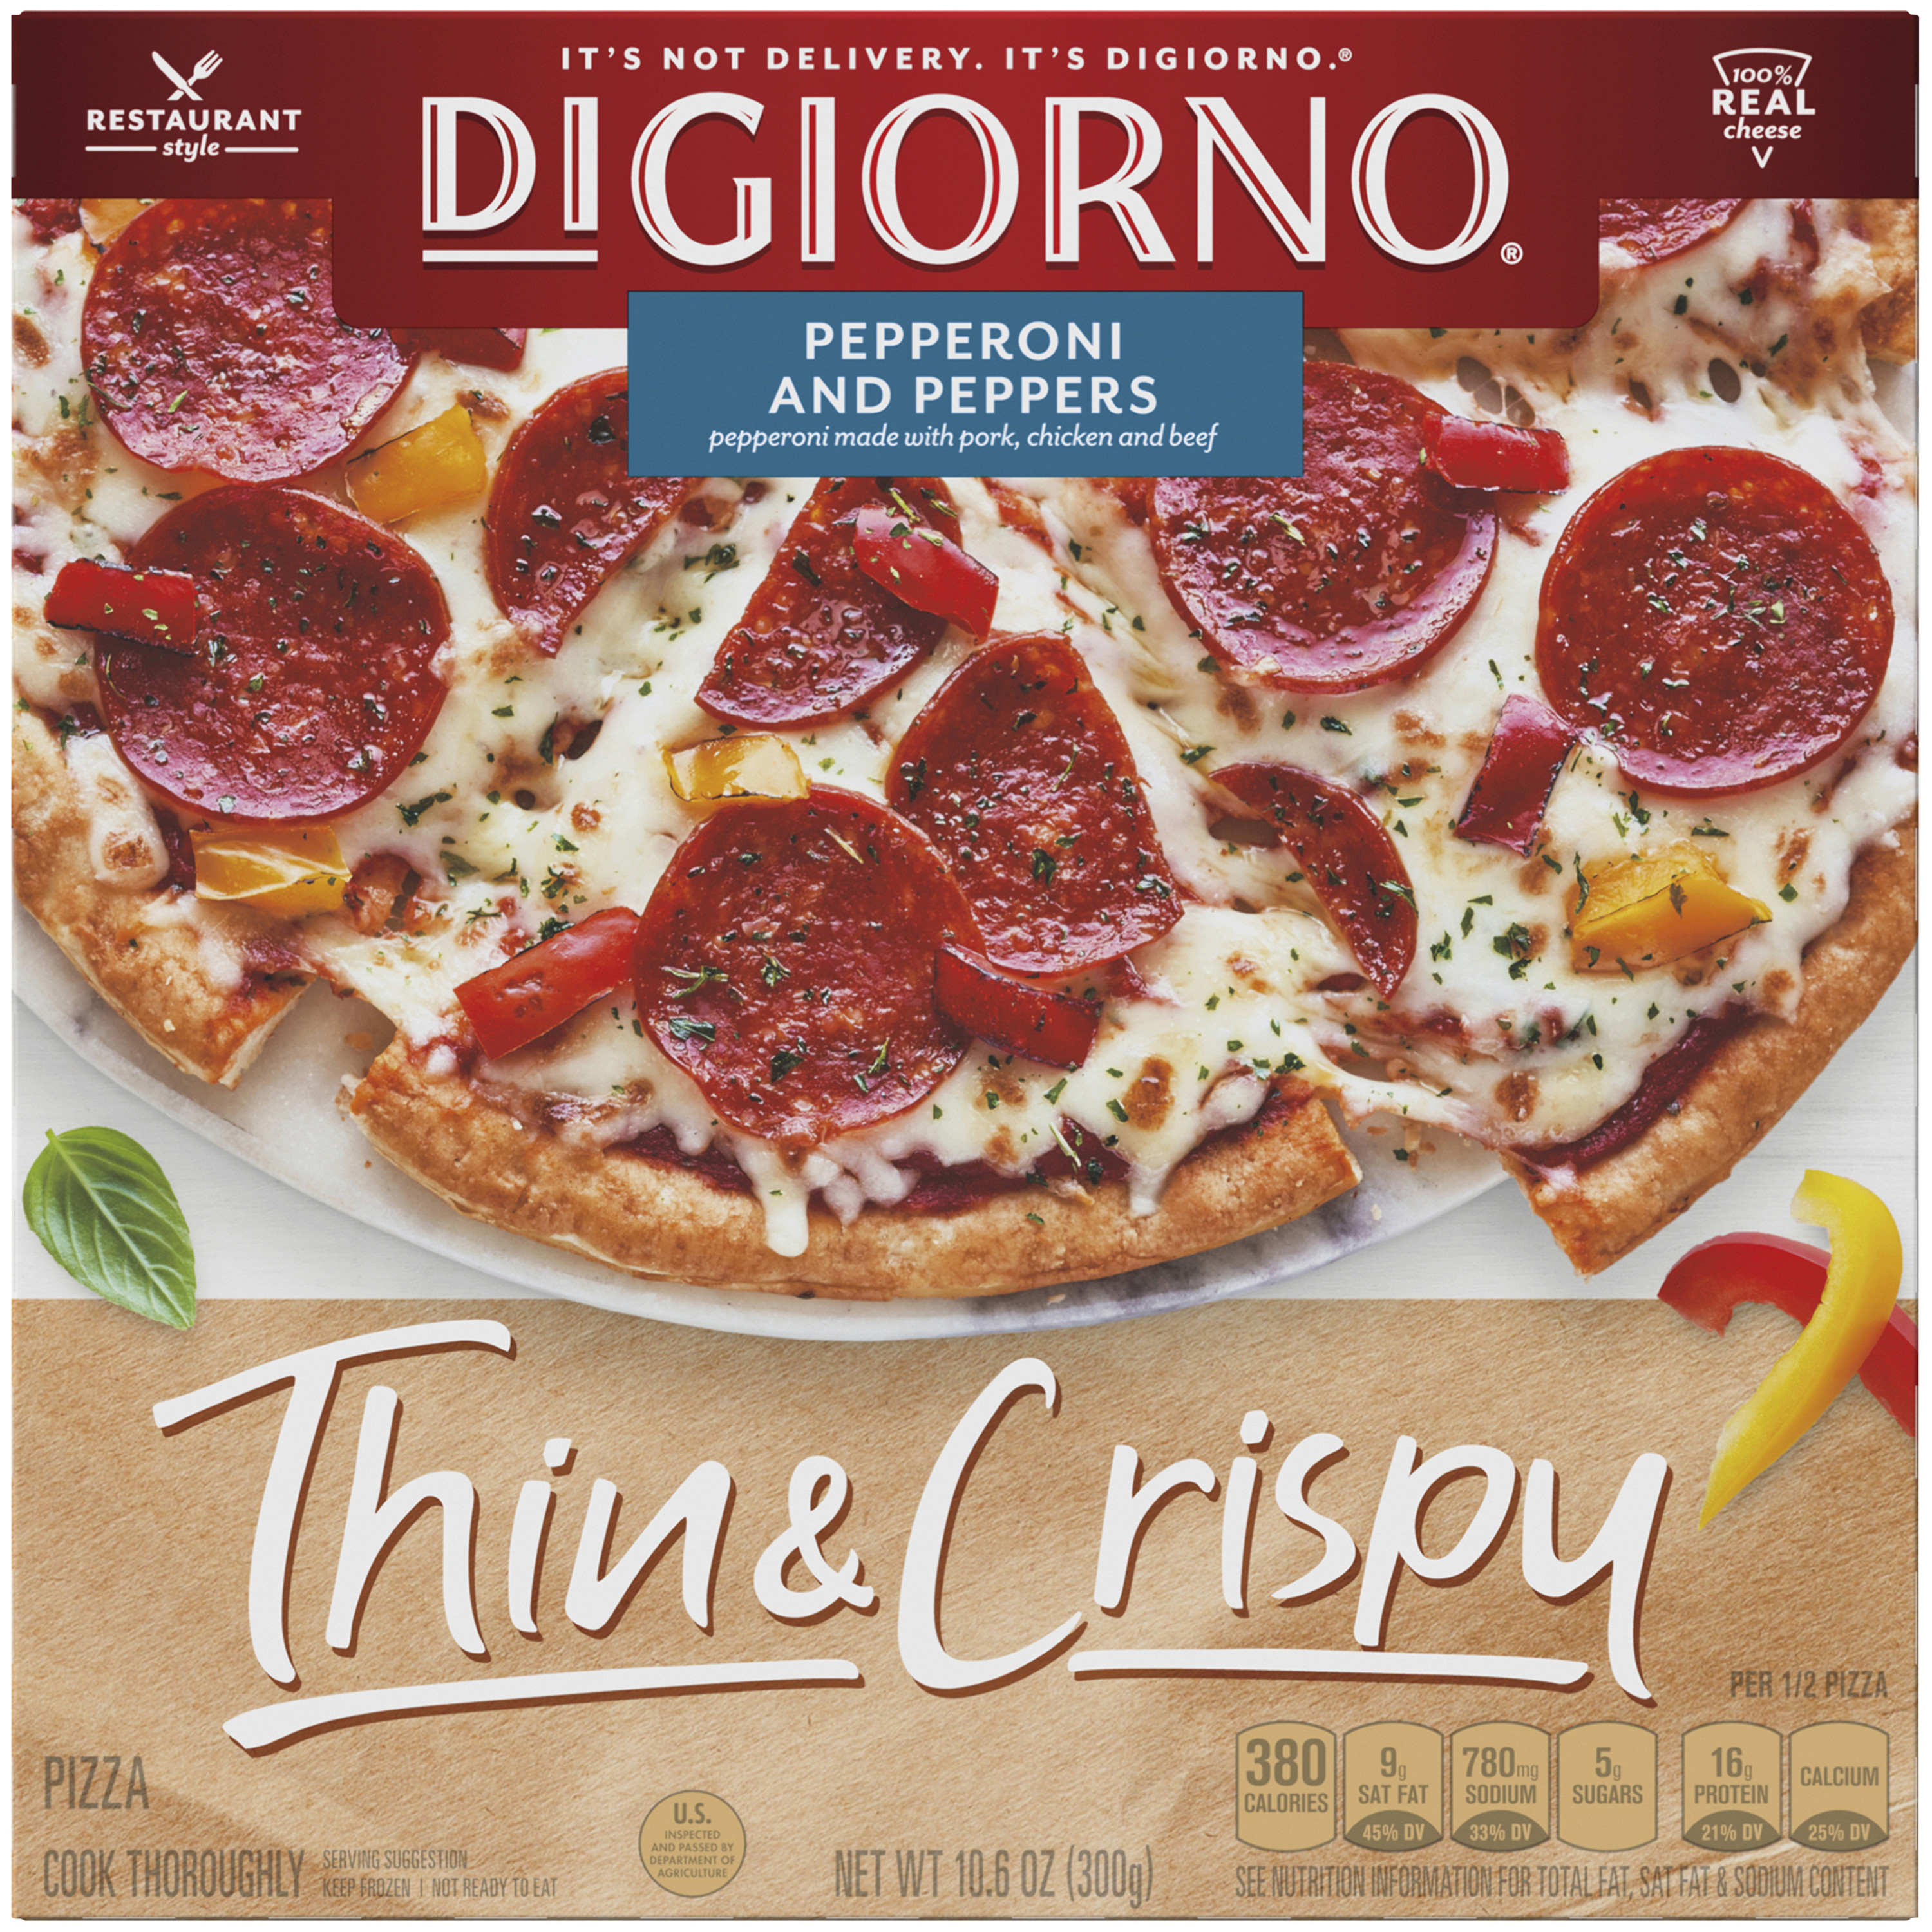 DIGIORNO Pepperoni and Peppers, Thin & Crispy Crust Pizza, 10.6 oz. (Frozen) - image 1 of 7